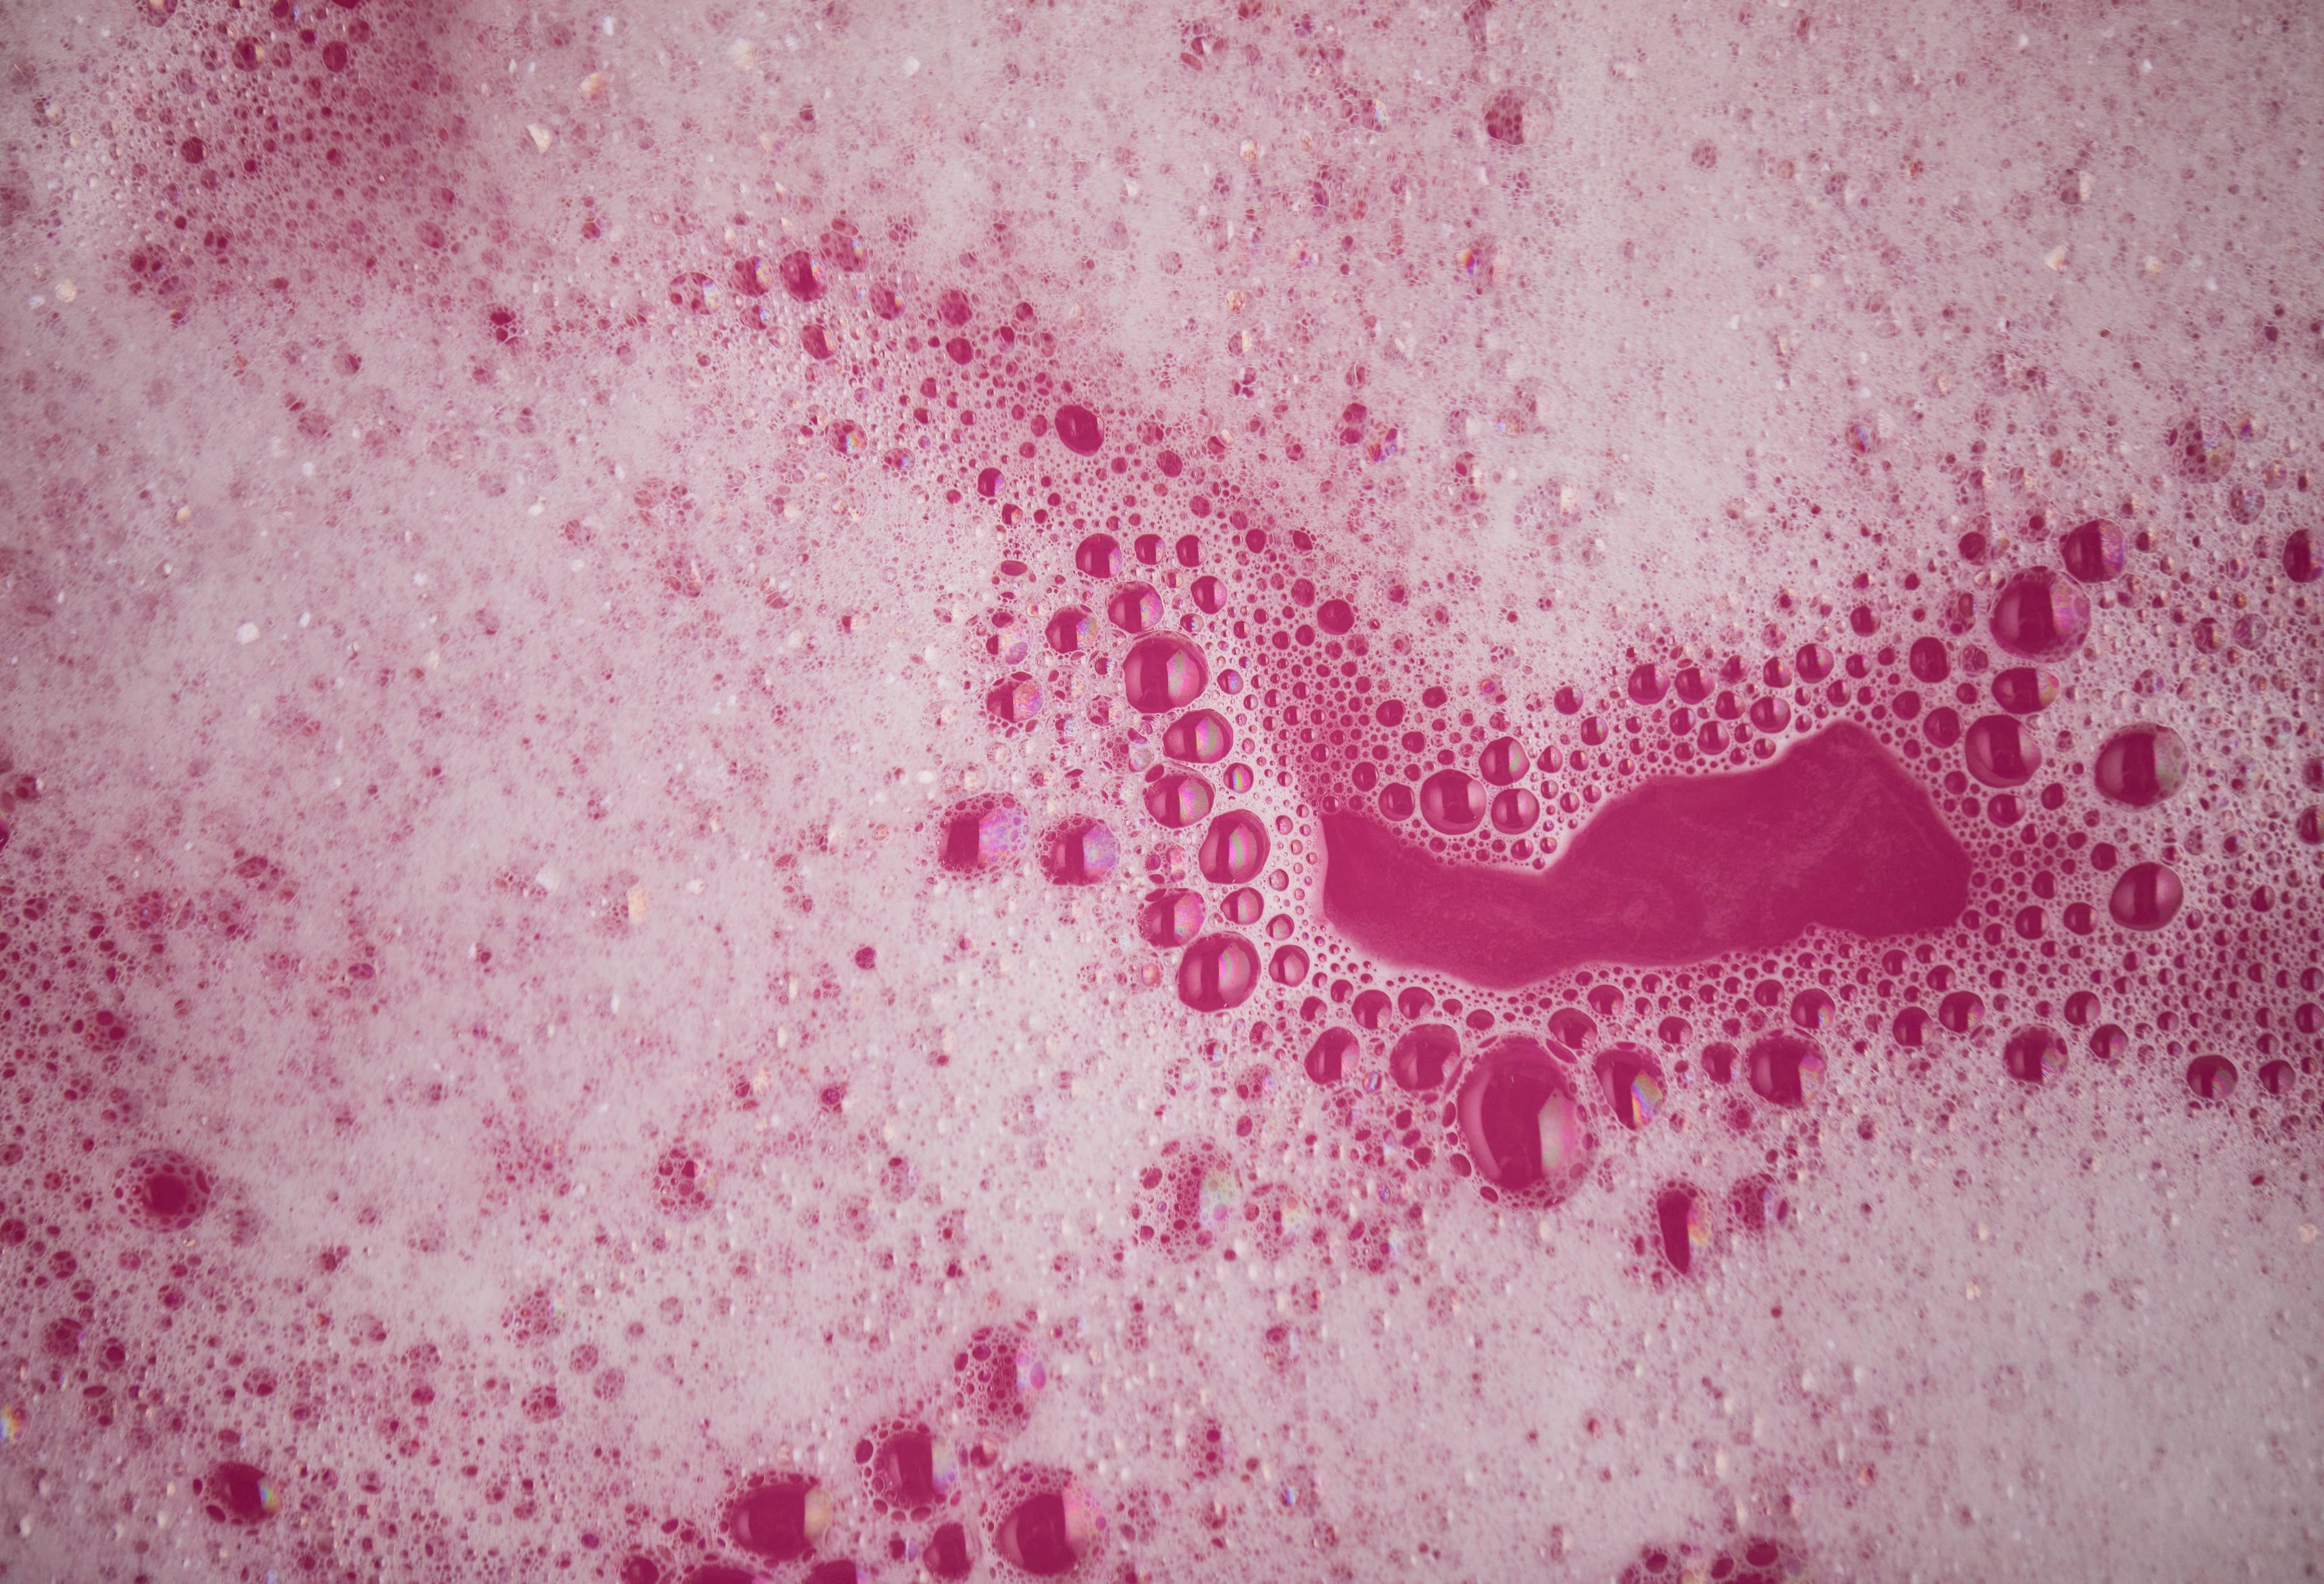 Image shows soft, foamy bubbles on a deep pink sea of bath water.